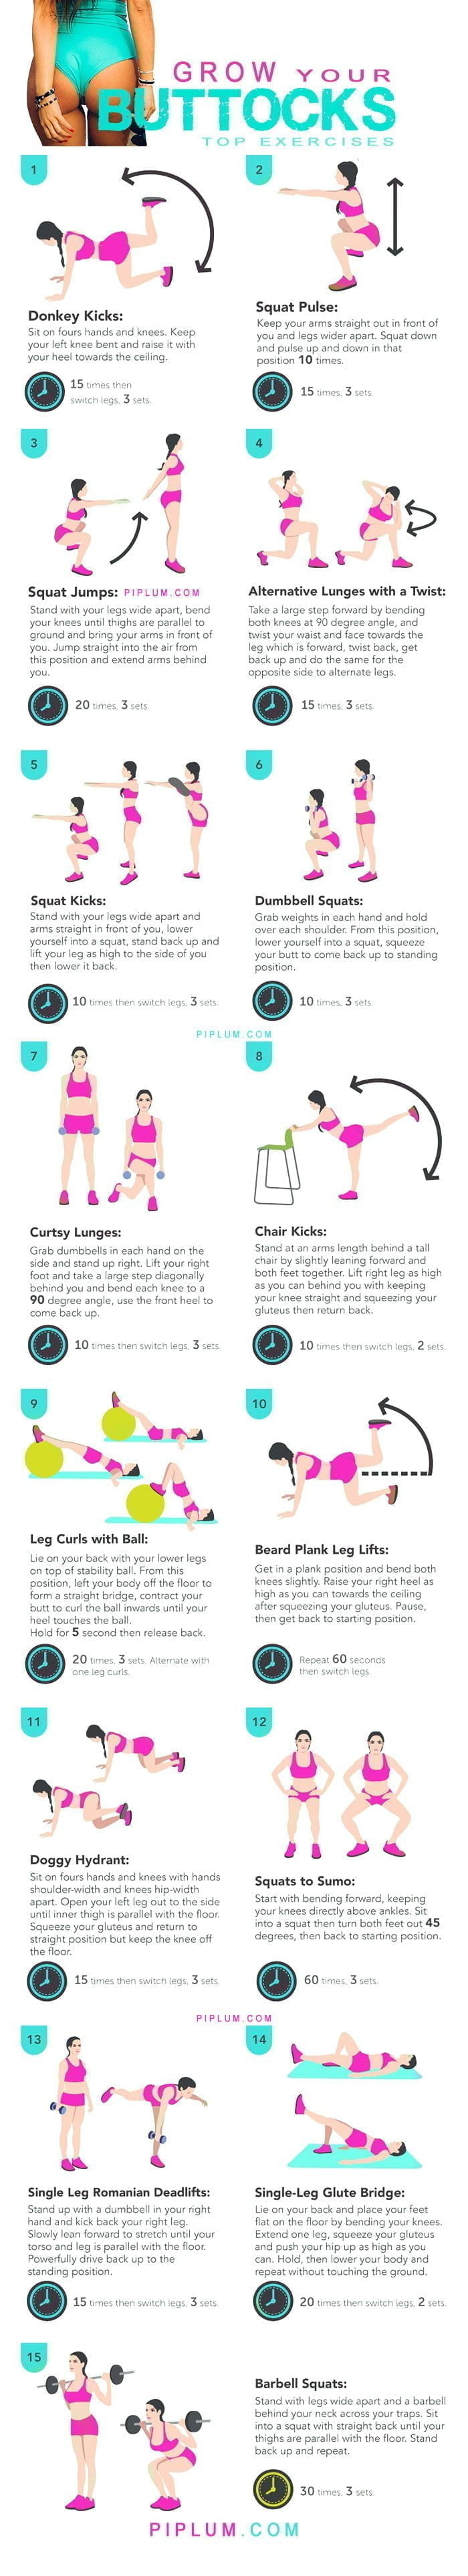 how-to-grow-butt-workout-exercises-butt-poster-infographic